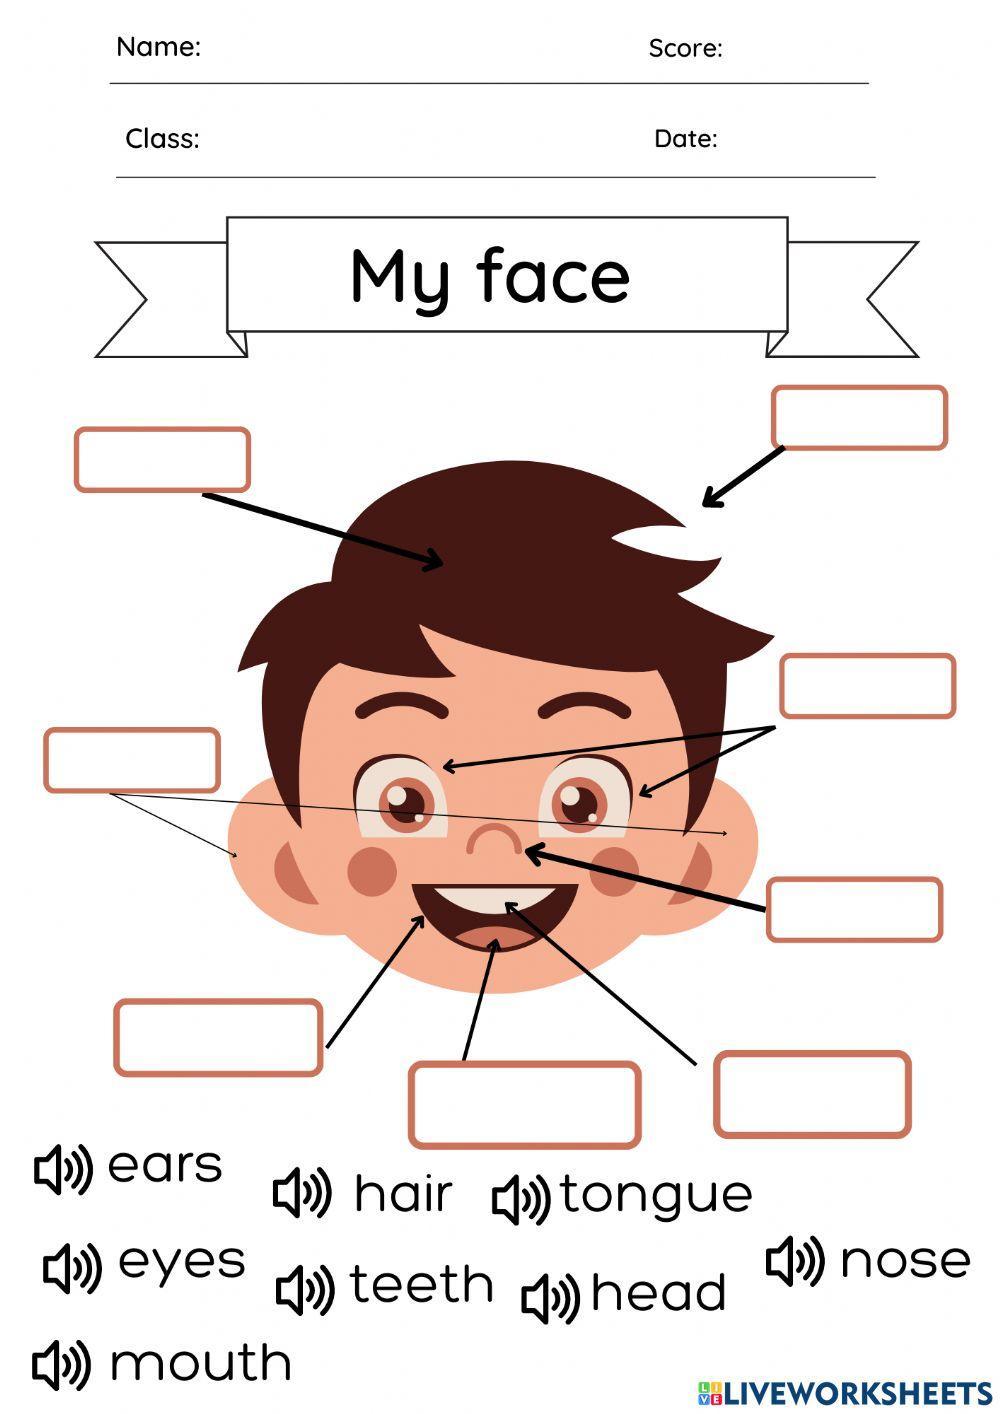 Body parts - My Face interactive worksheet | Live Worksheets